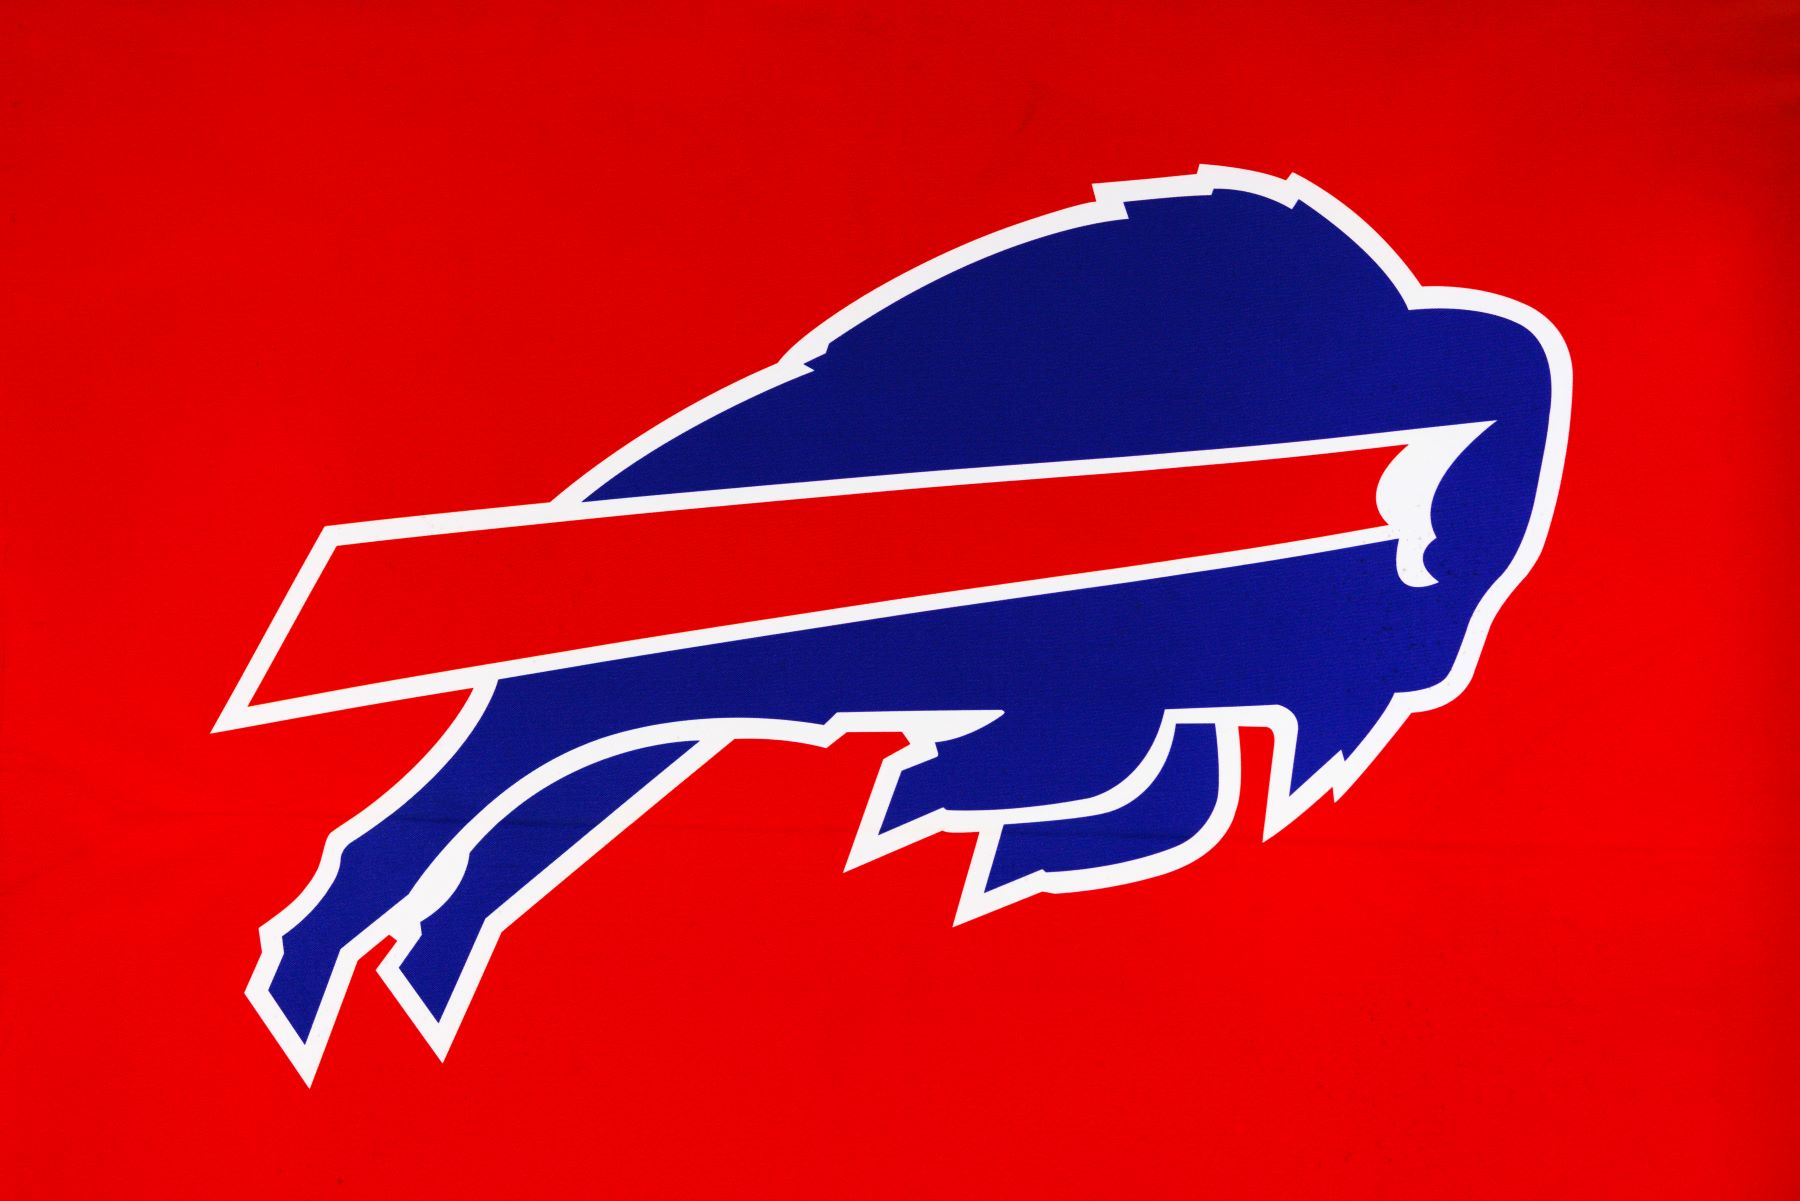 NFL team Buffalo Bills logo seen at the Los Angeles Convention Center during the Super Bowl Experience